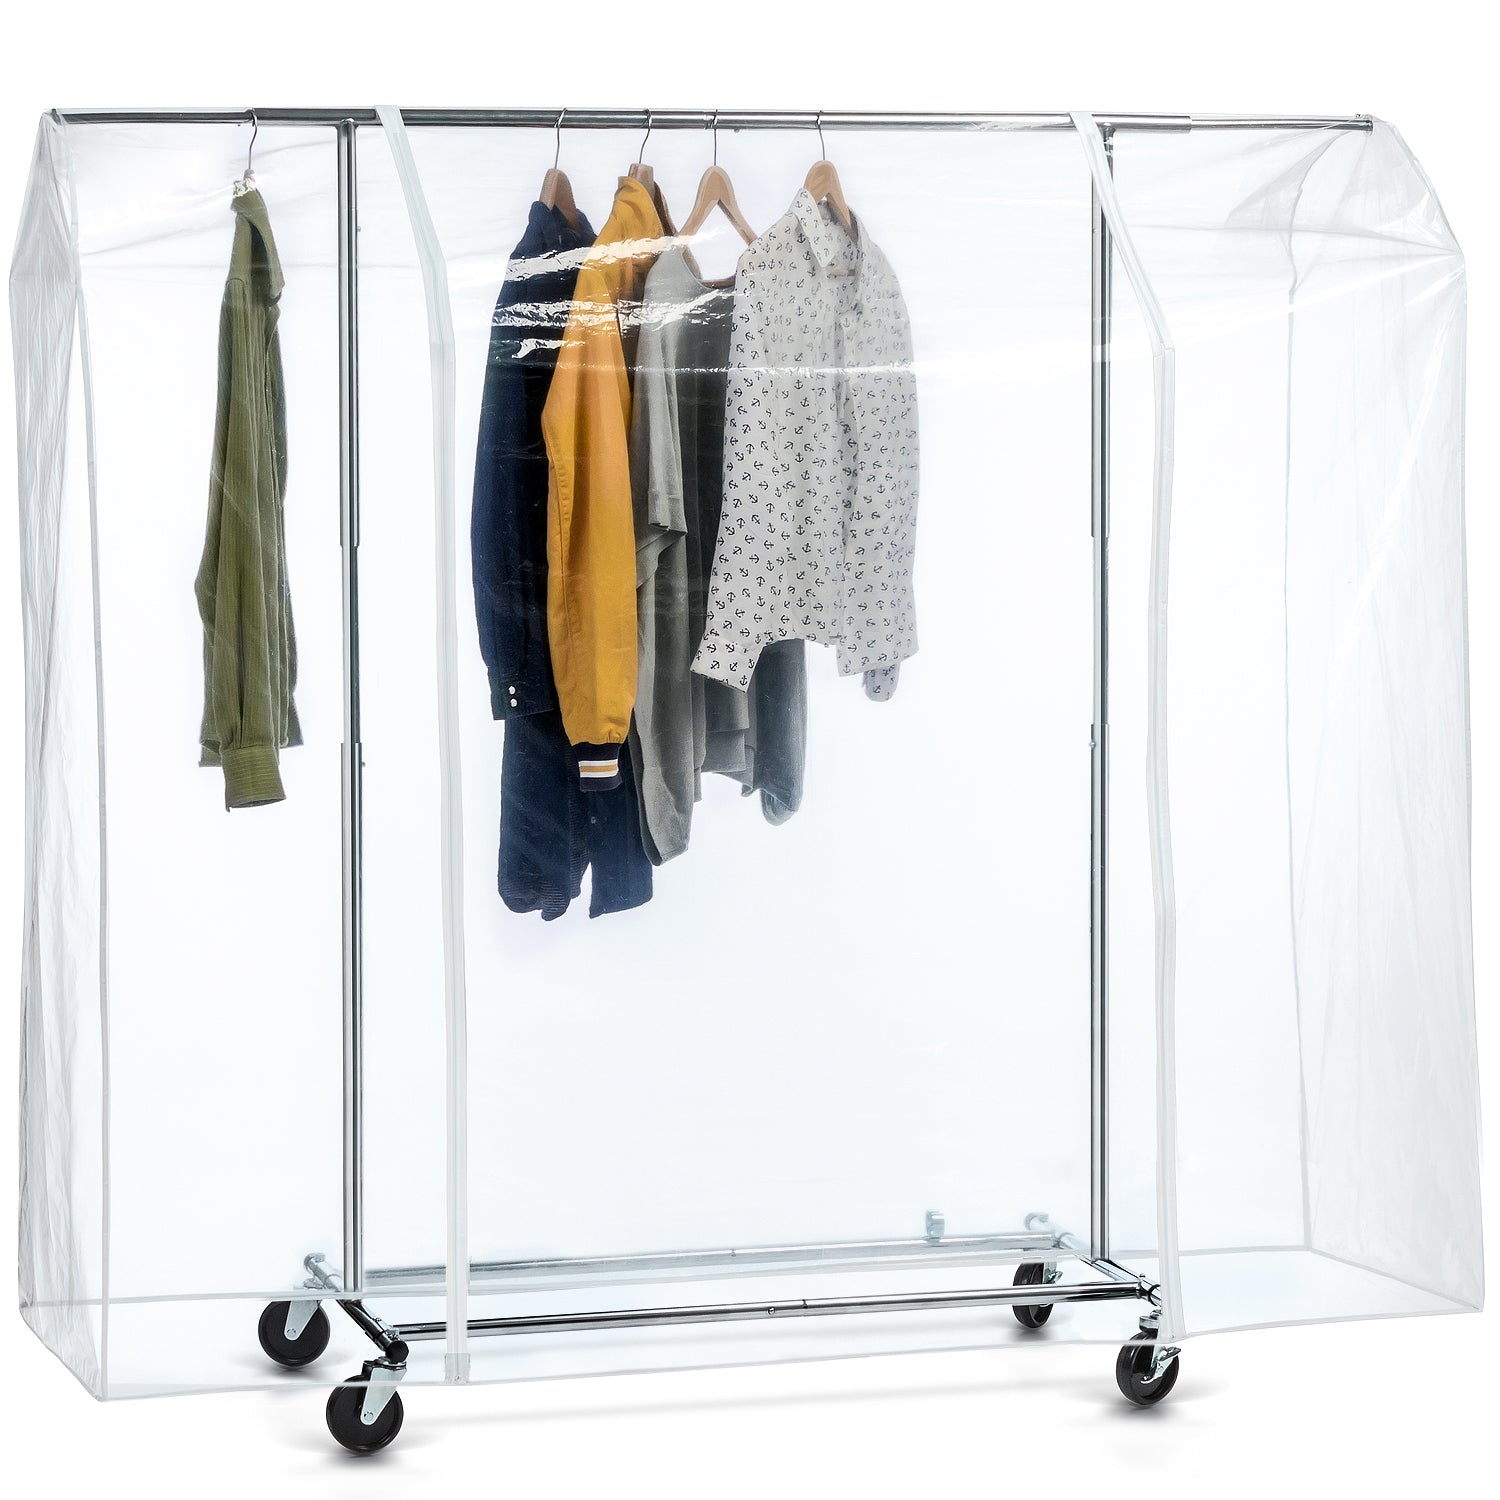 Tatkraft Big - Cover for Clothes Rails keeps Clothes Free from Dust and Dirt, Garment Rack Protection Cover with Zipper, Transparent